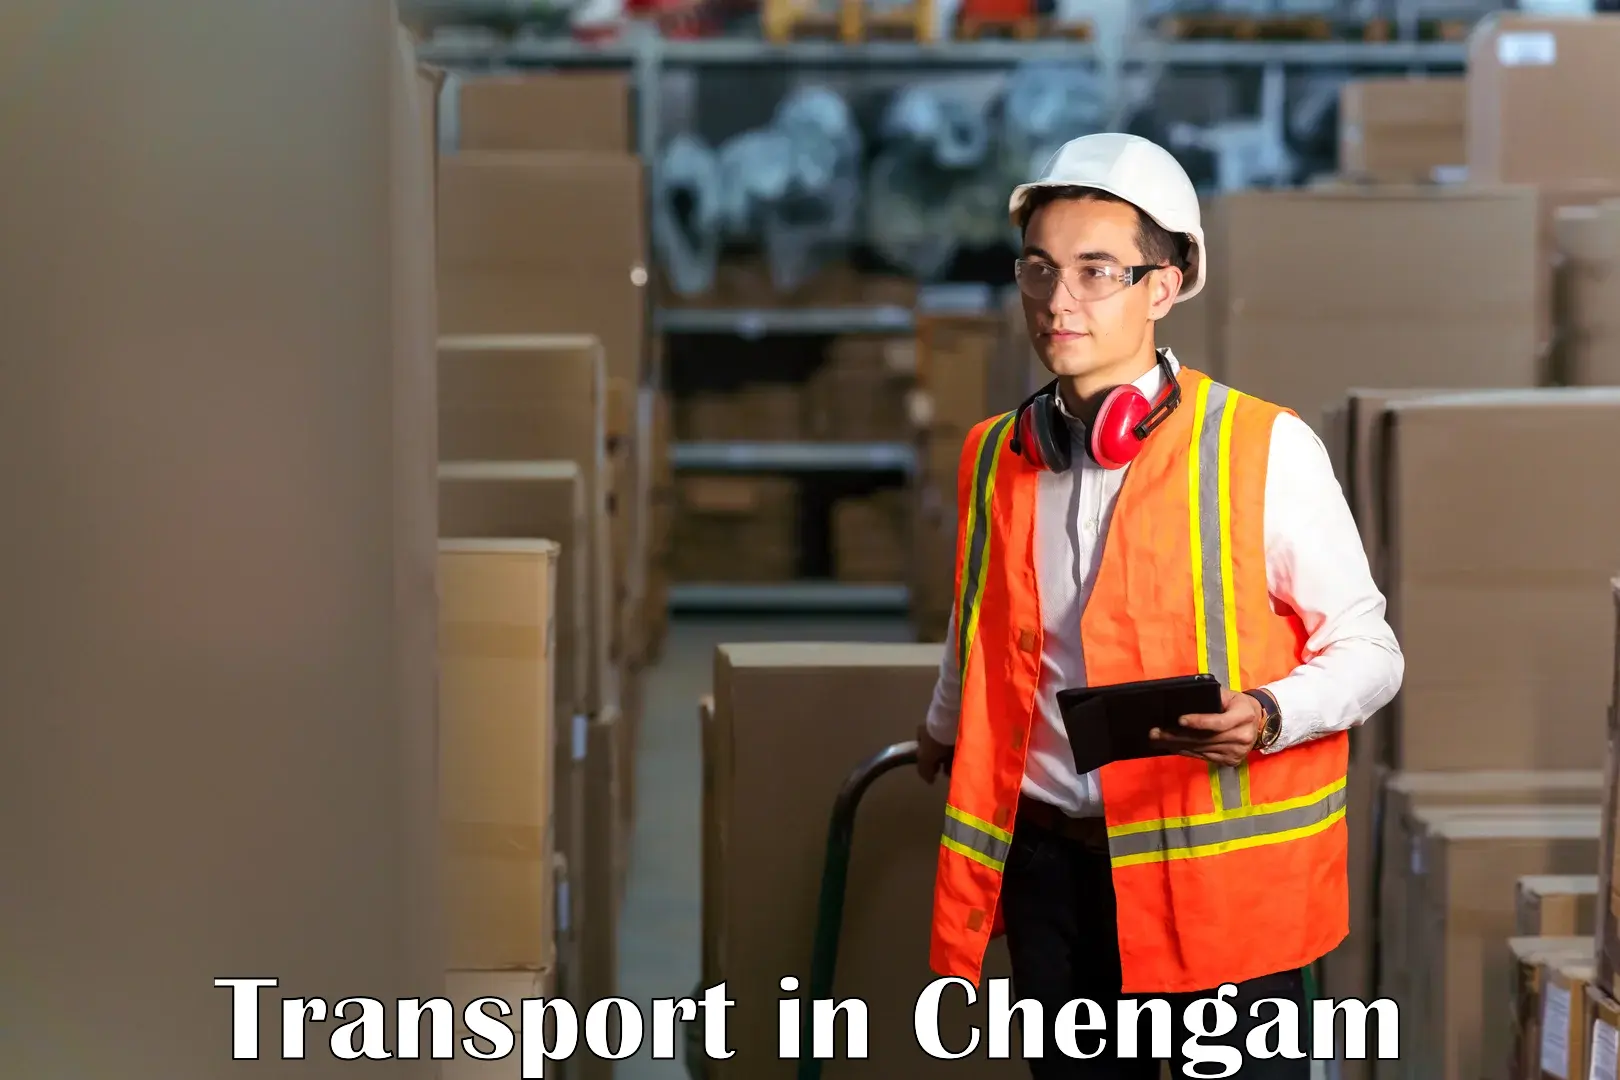 Material transport services in Chengam